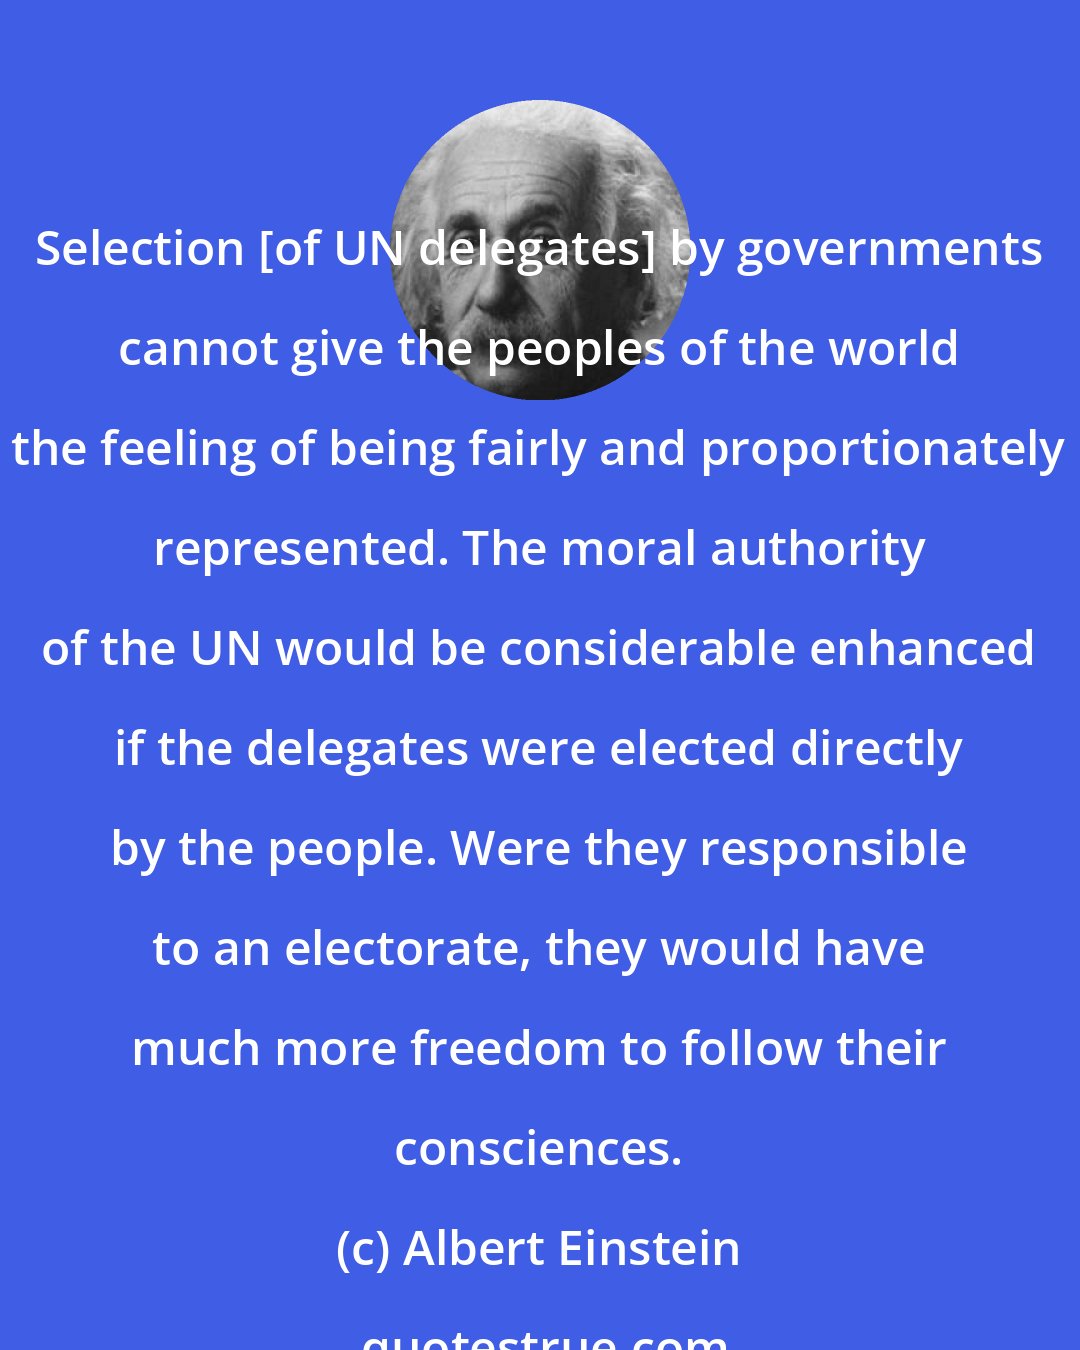 Albert Einstein: Selection [of UN delegates] by governments cannot give the peoples of the world the feeling of being fairly and proportionately represented. The moral authority of the UN would be considerable enhanced if the delegates were elected directly by the people. Were they responsible to an electorate, they would have much more freedom to follow their consciences.